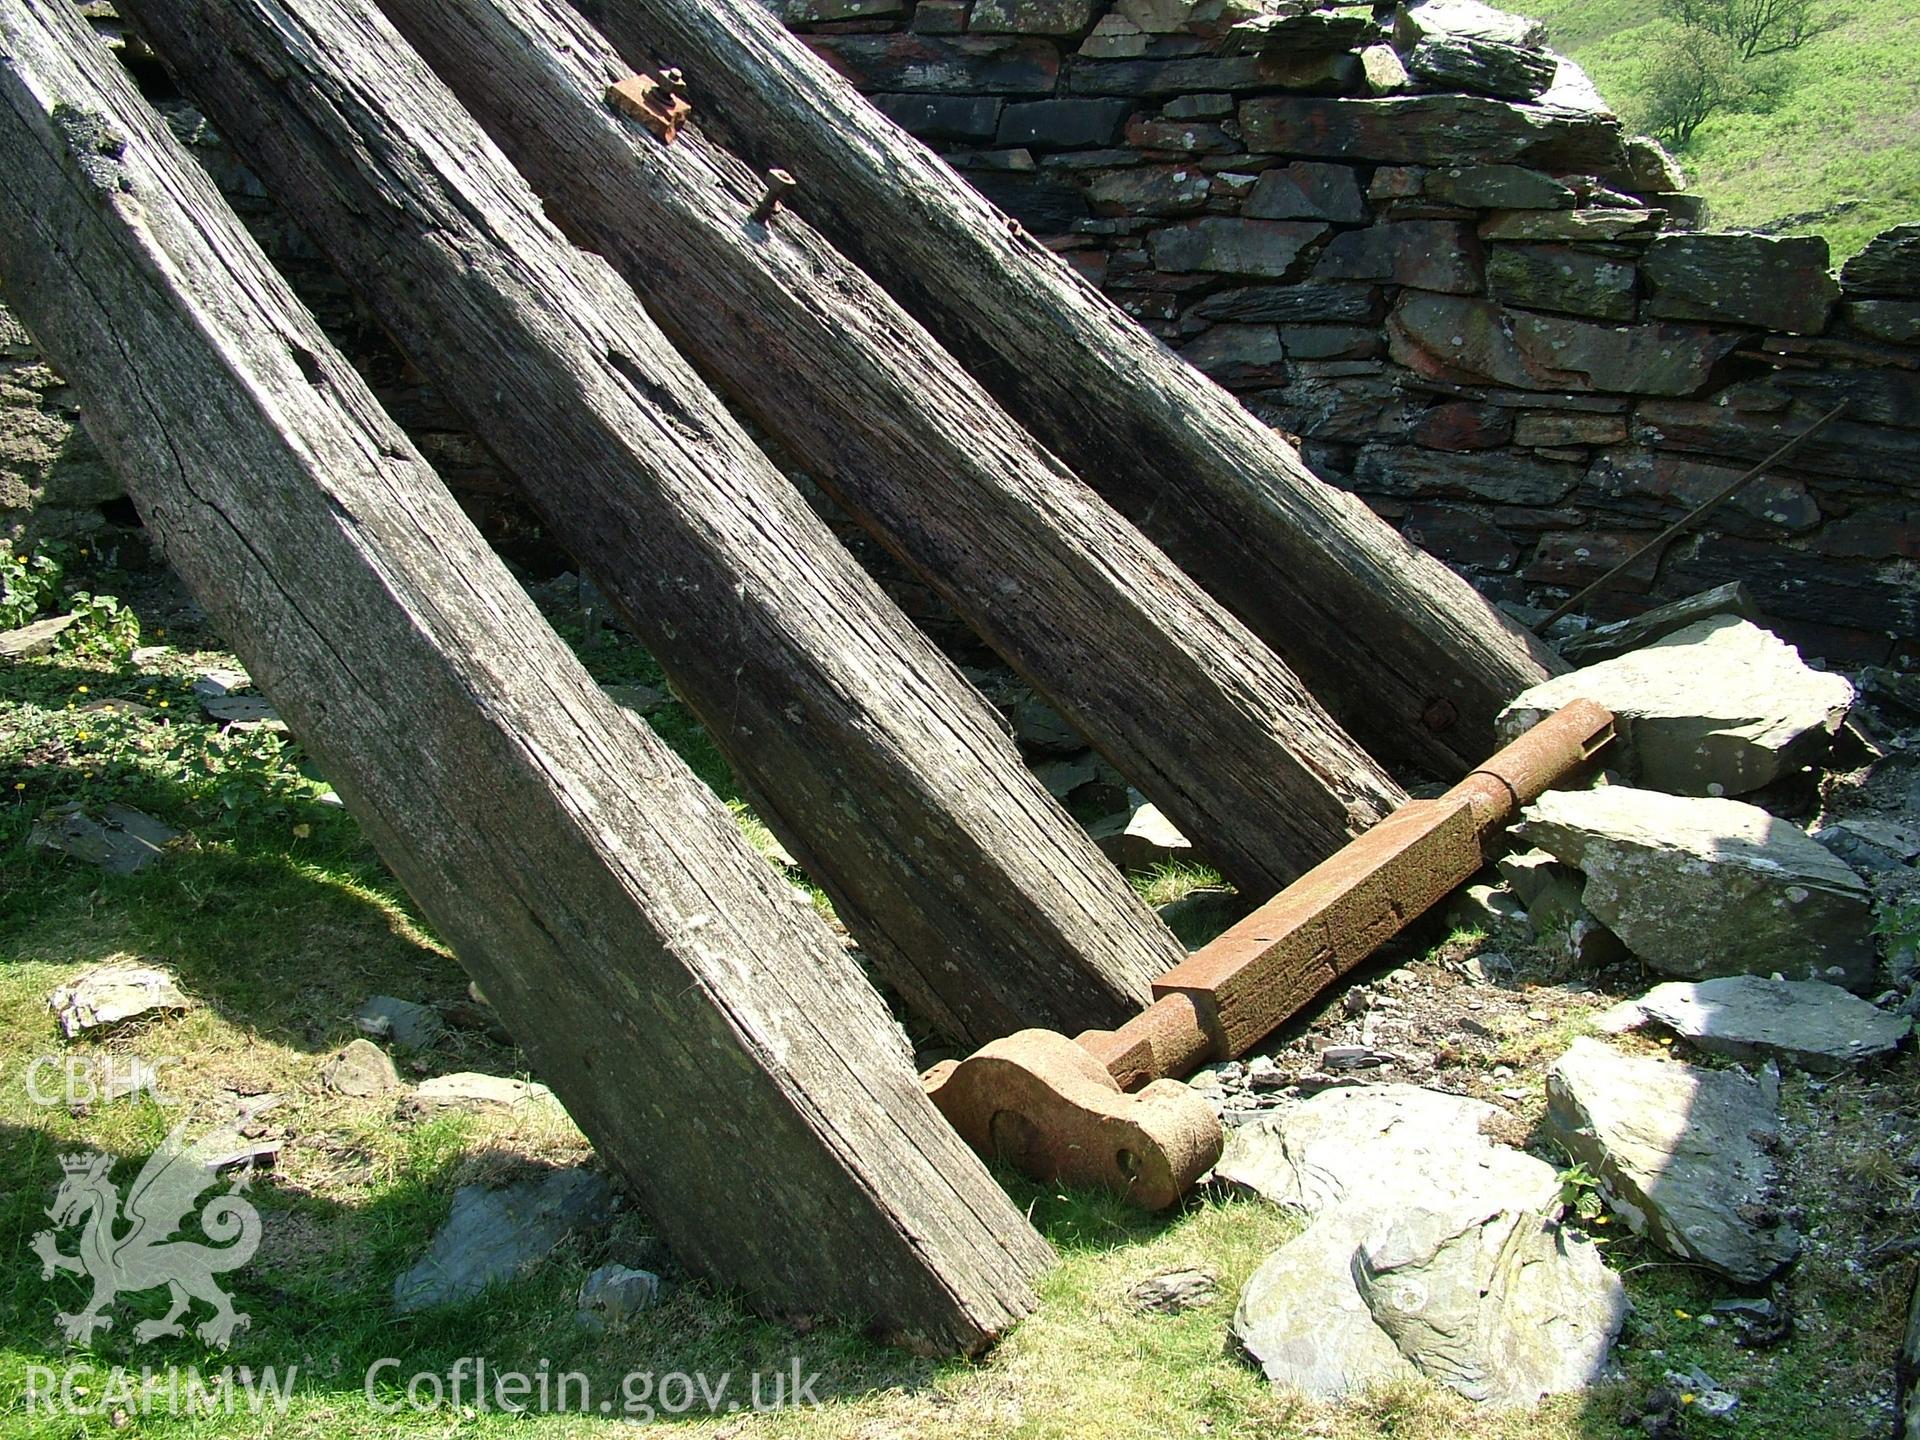 Close up of beams and water wheel axle.